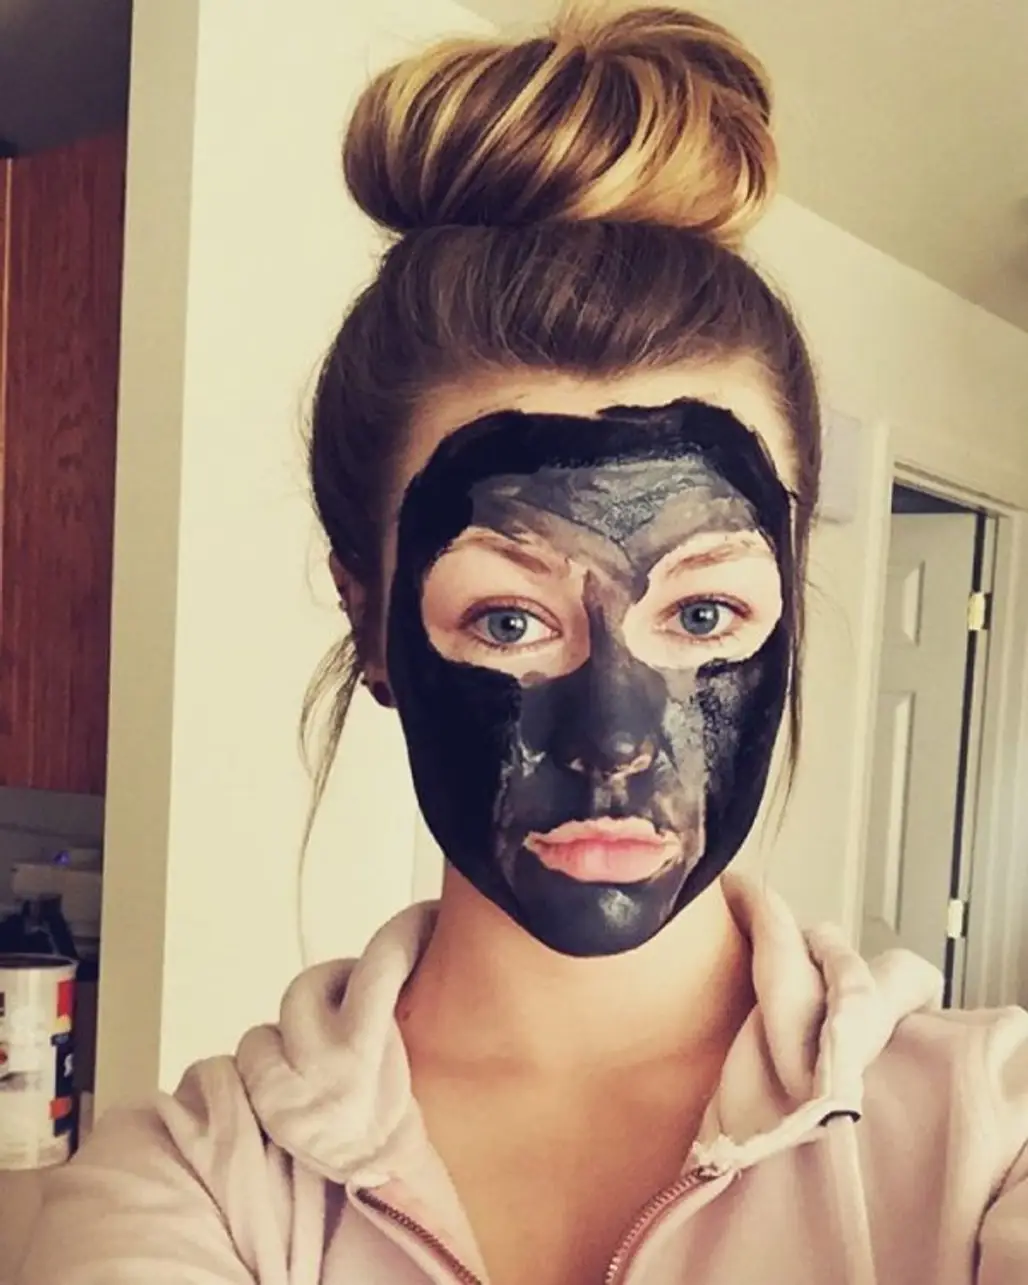 Her Messy Bun and Face-mask Fun